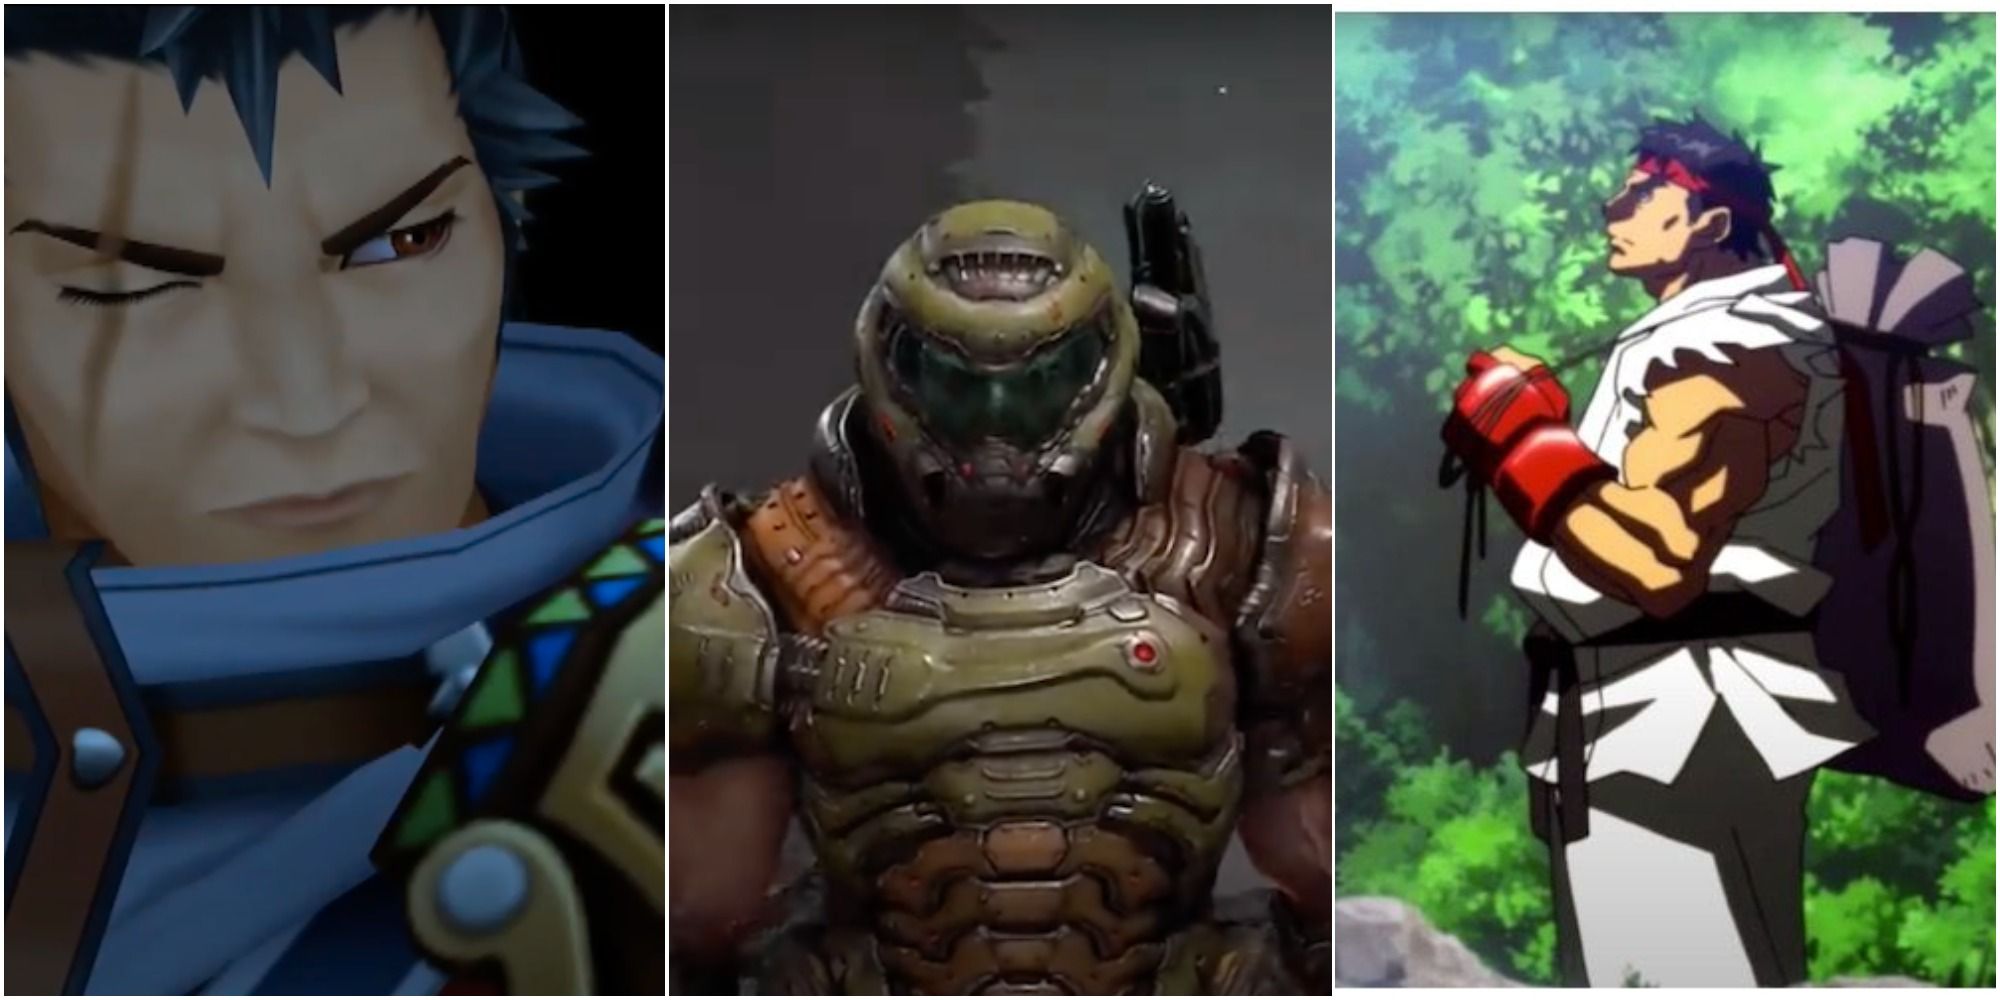 Auron from Kingdom Hearts 2, Master Chief from Halo, Ryu from Street Fighter